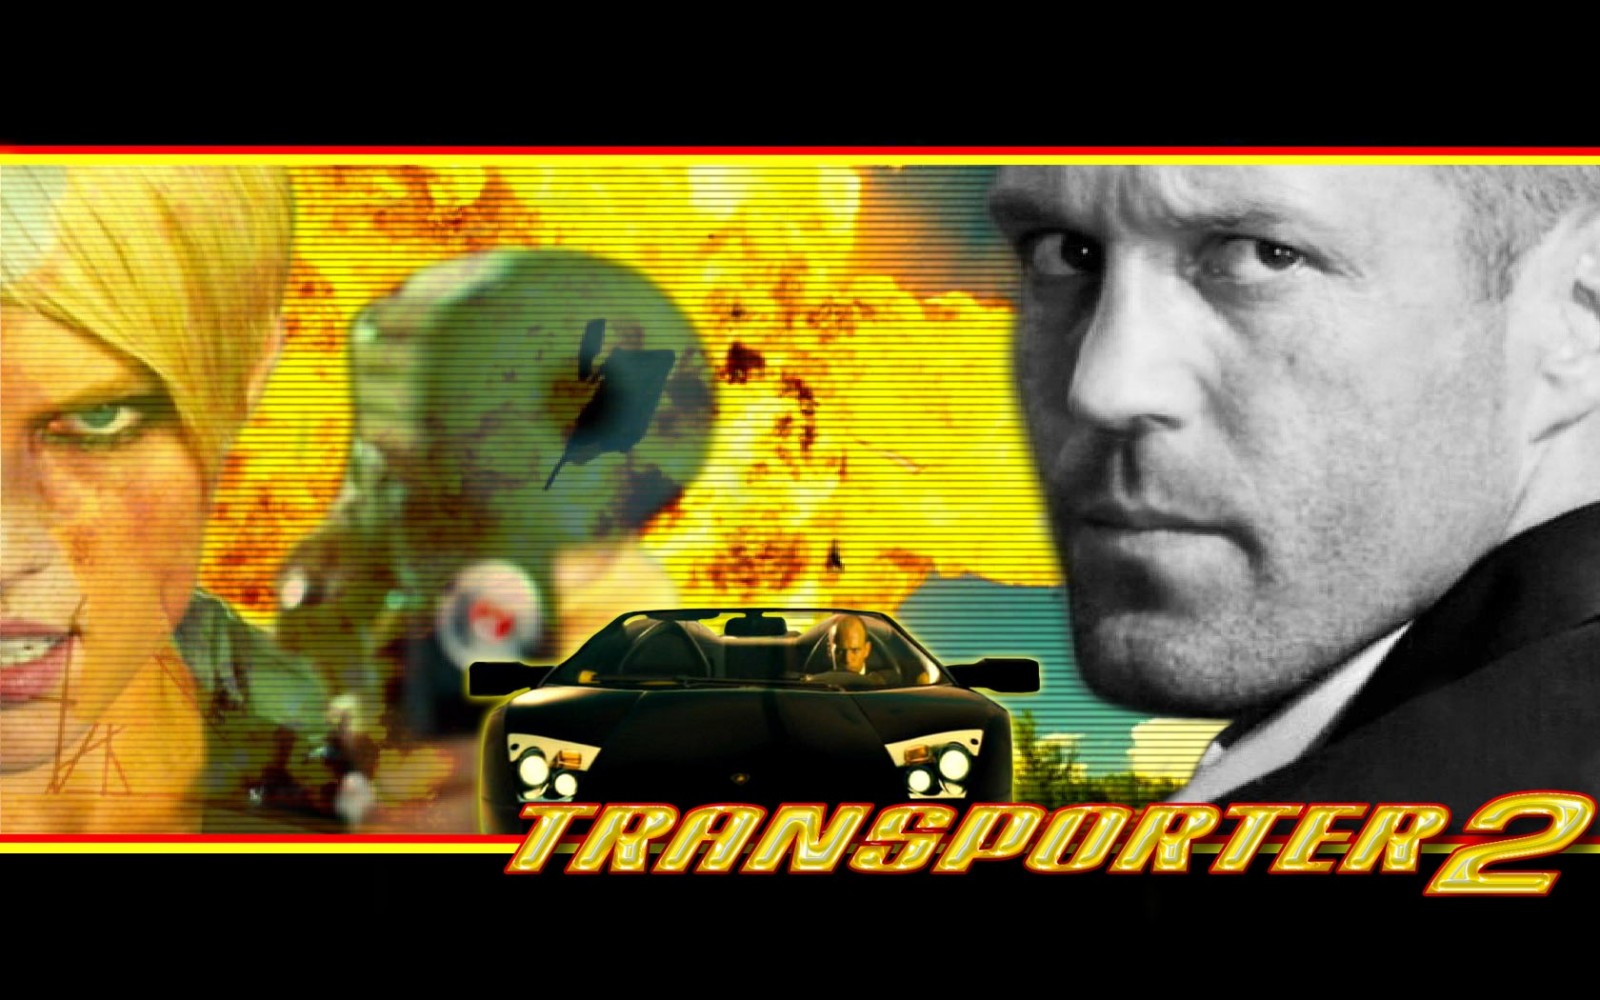 Download full size Transporter 2 wallpaper / Movies / 1600x1000